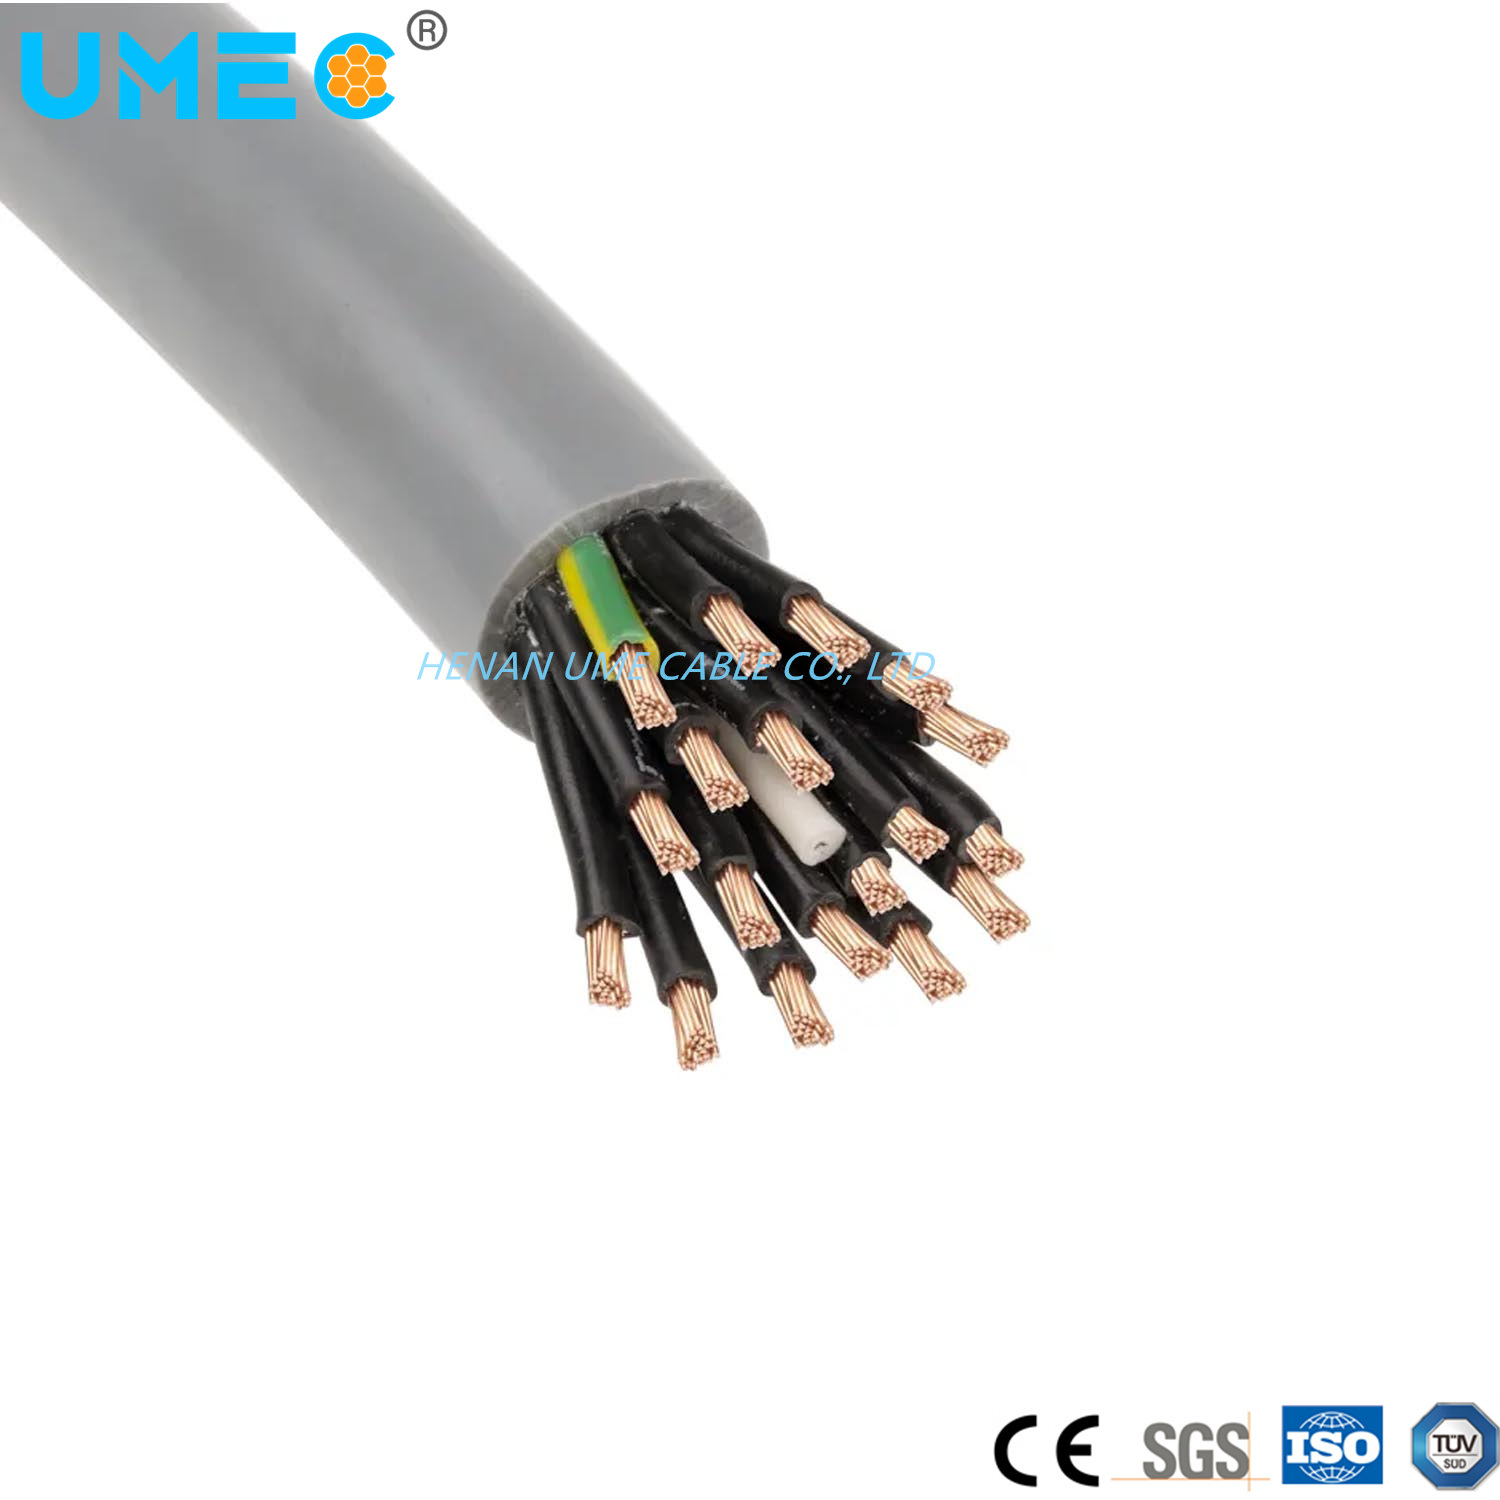 Ysly-Jz/-Jb Control Power Ysly Cable